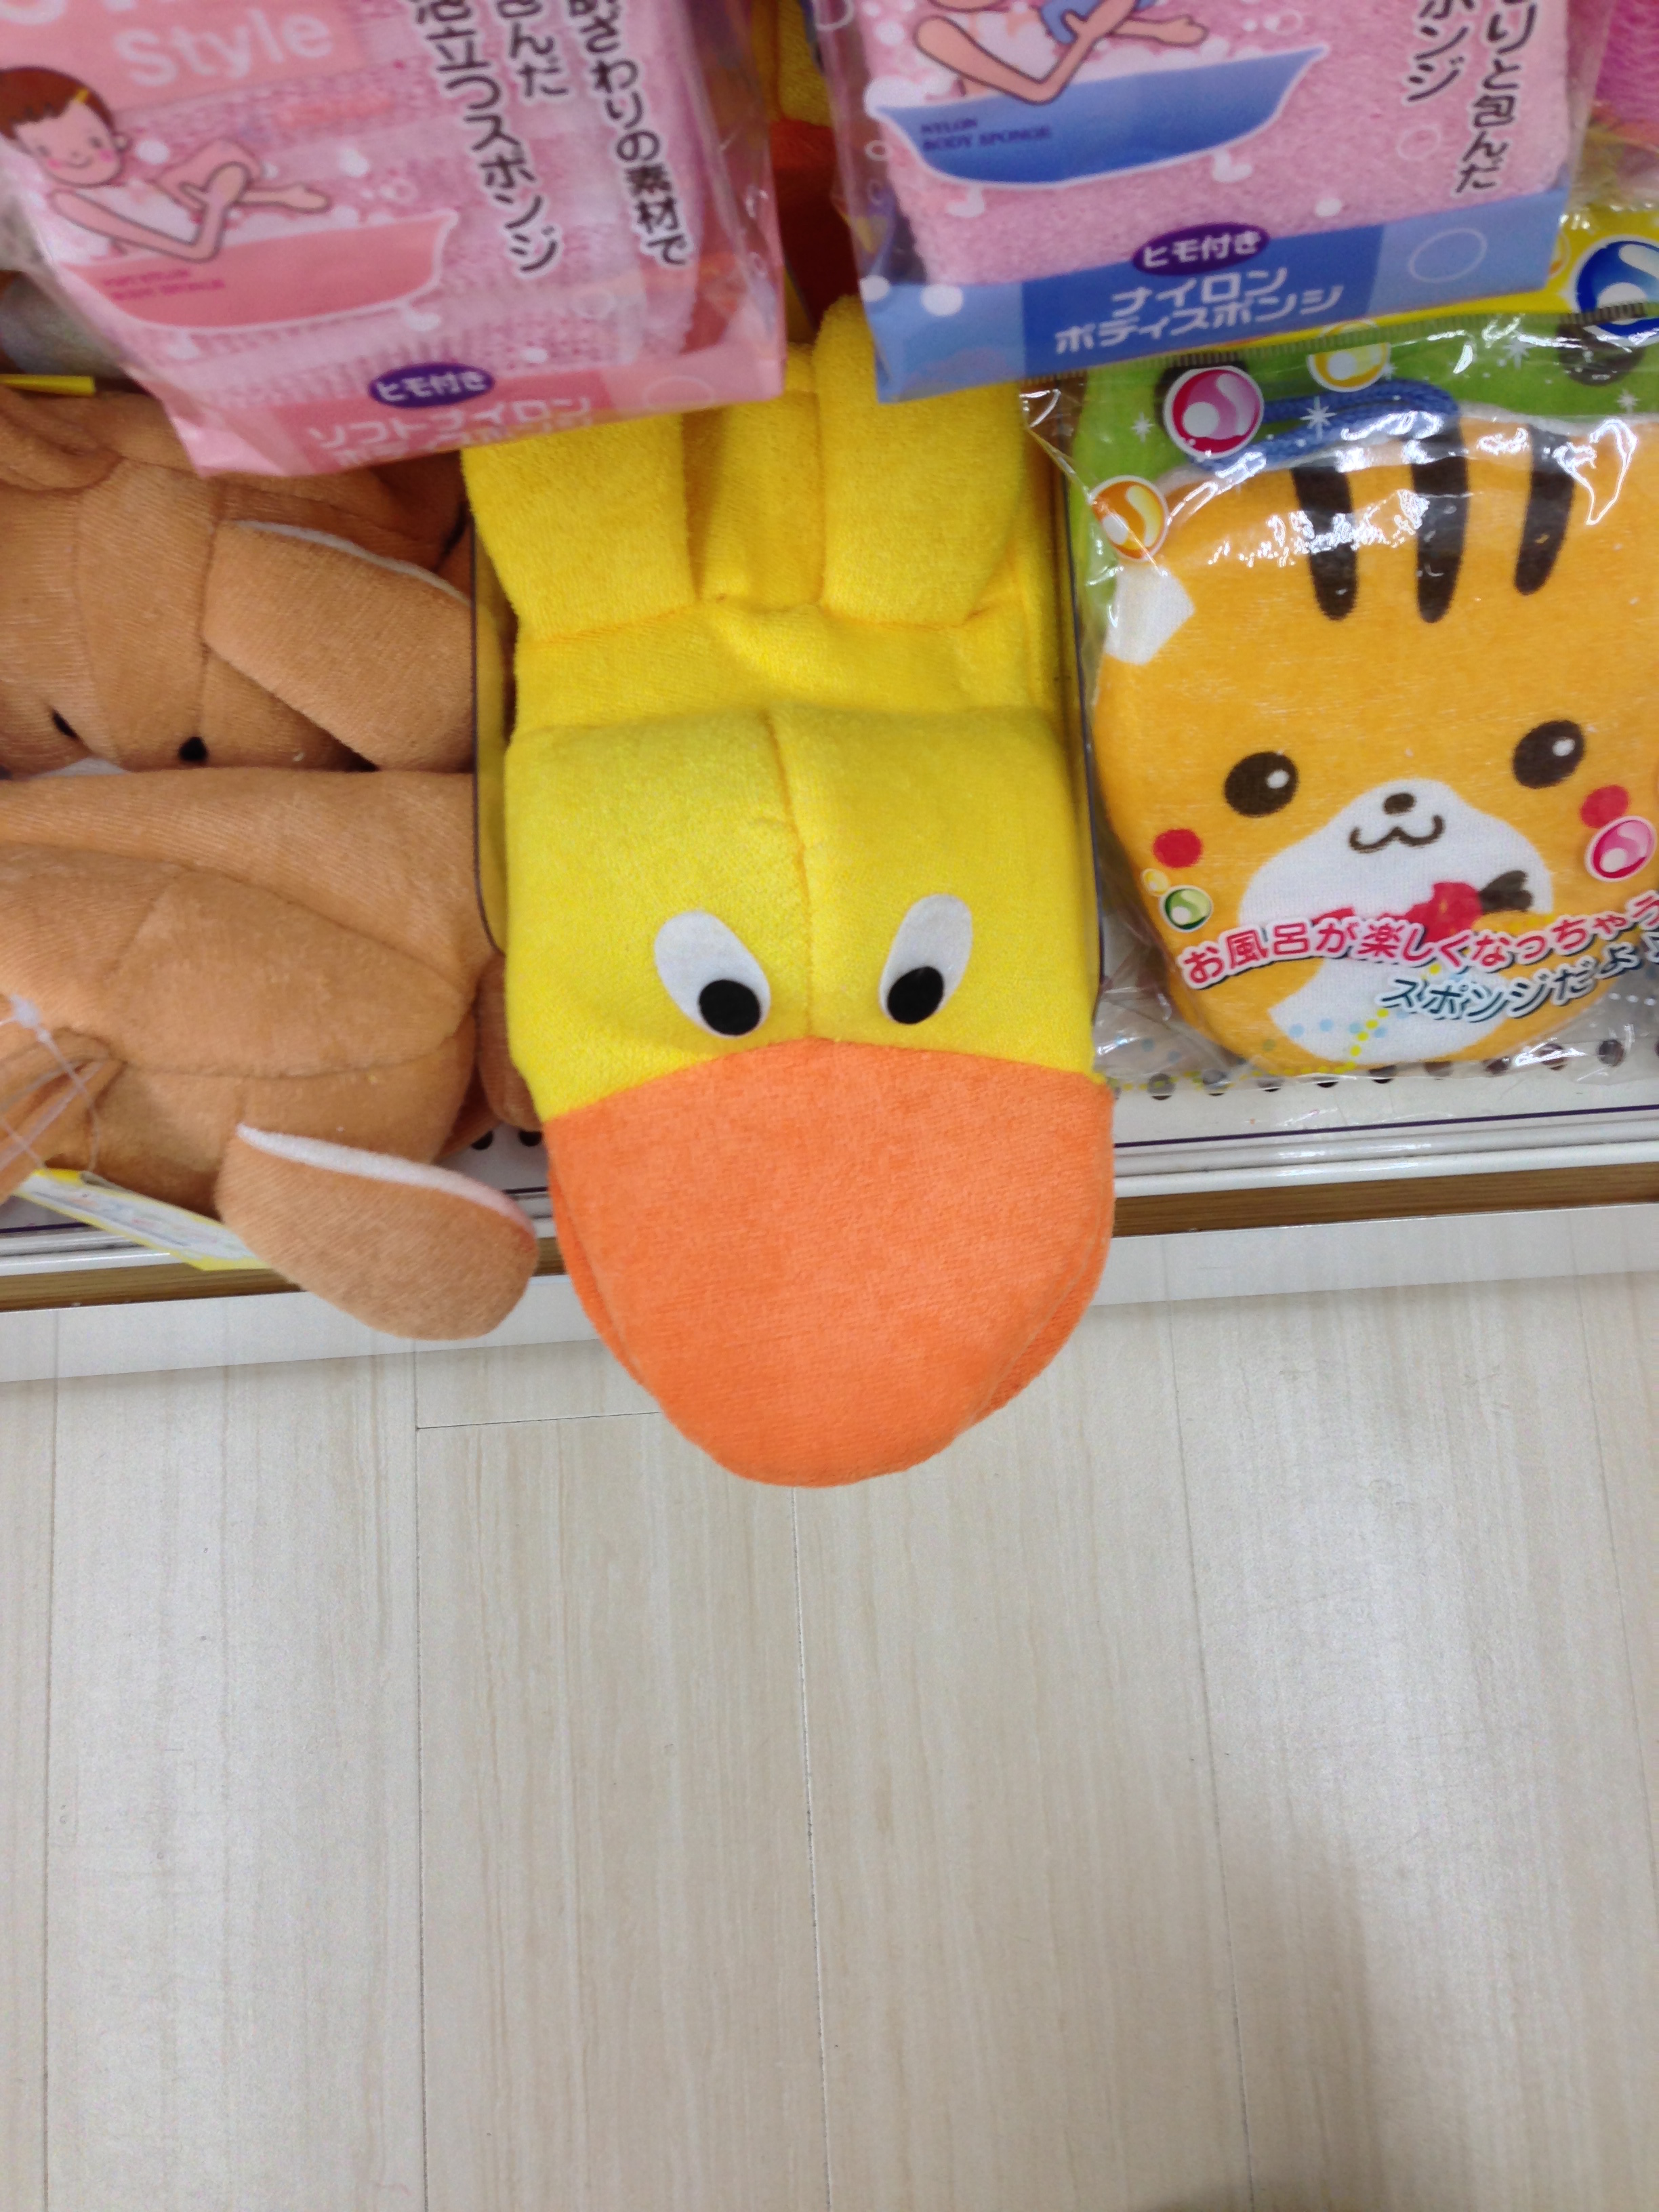 In the 100Yen store, there were many examples of cuteness, such as this one.